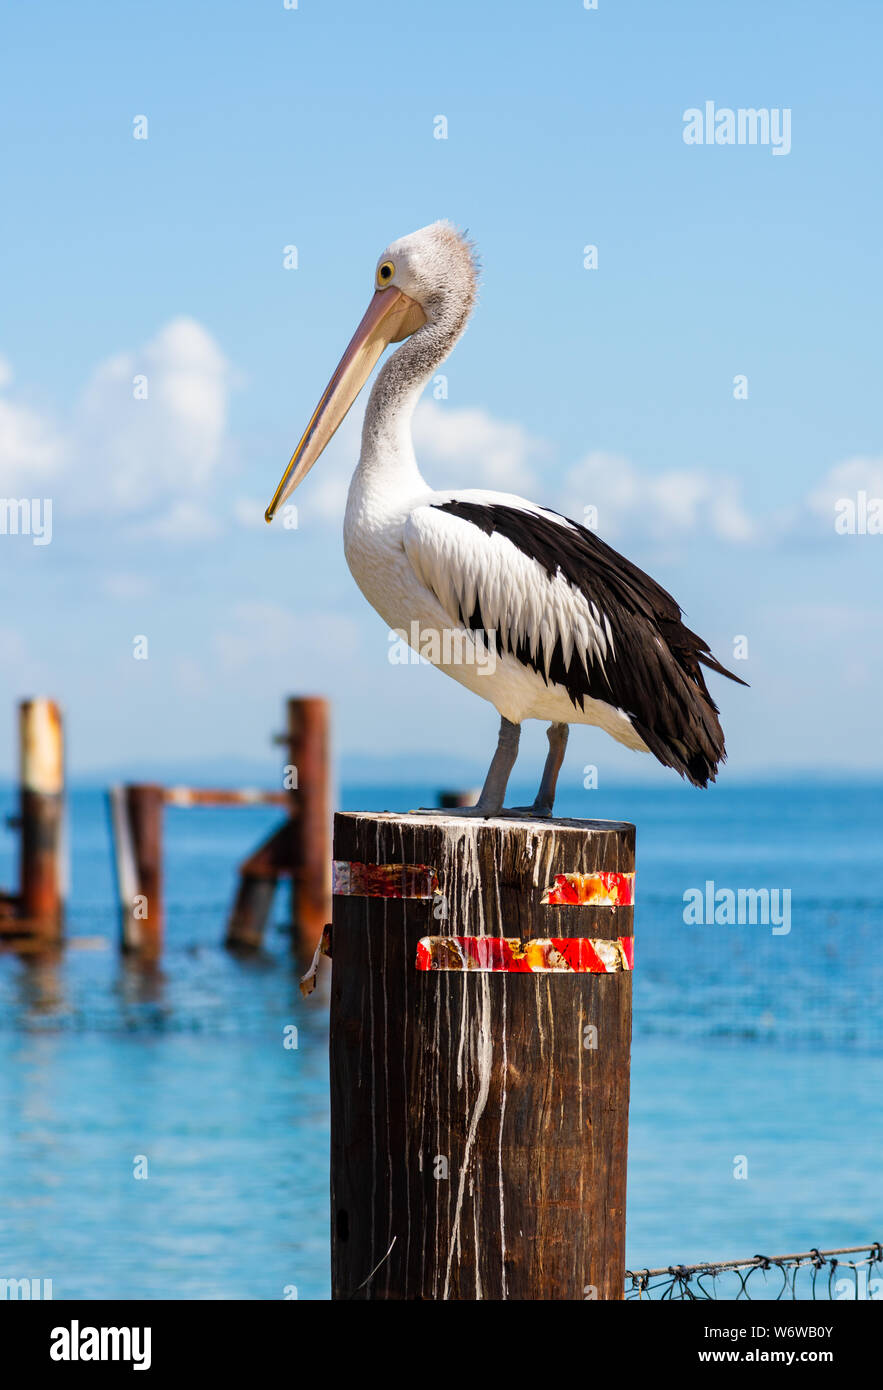 A Pelican on a Pole by the Ocean Stock Photo